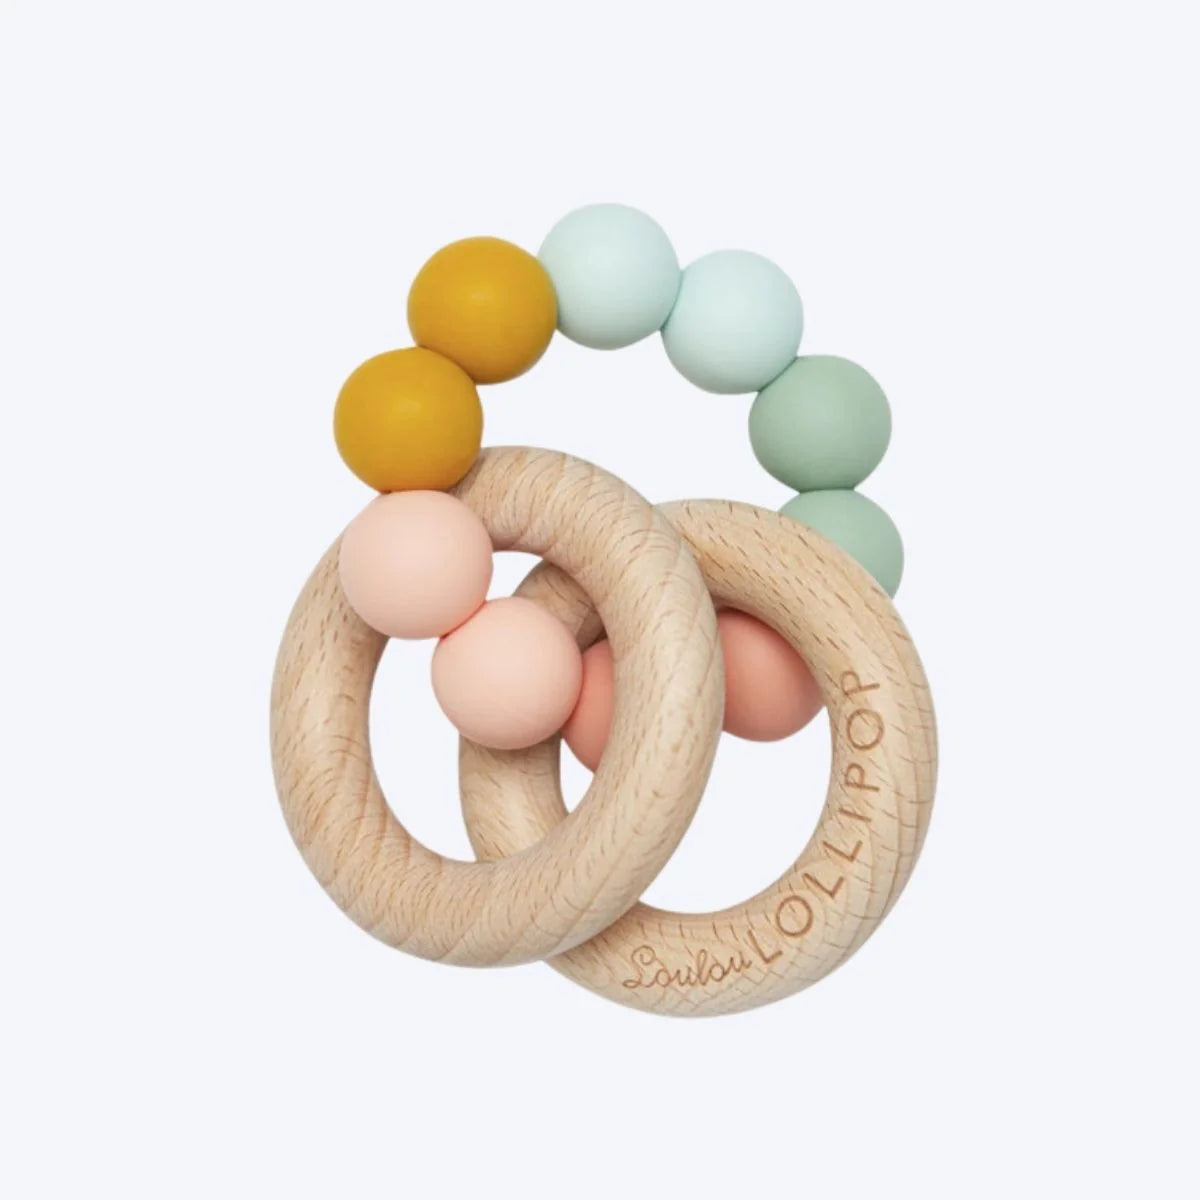 Bubble teething ring by Loulou Lollipop